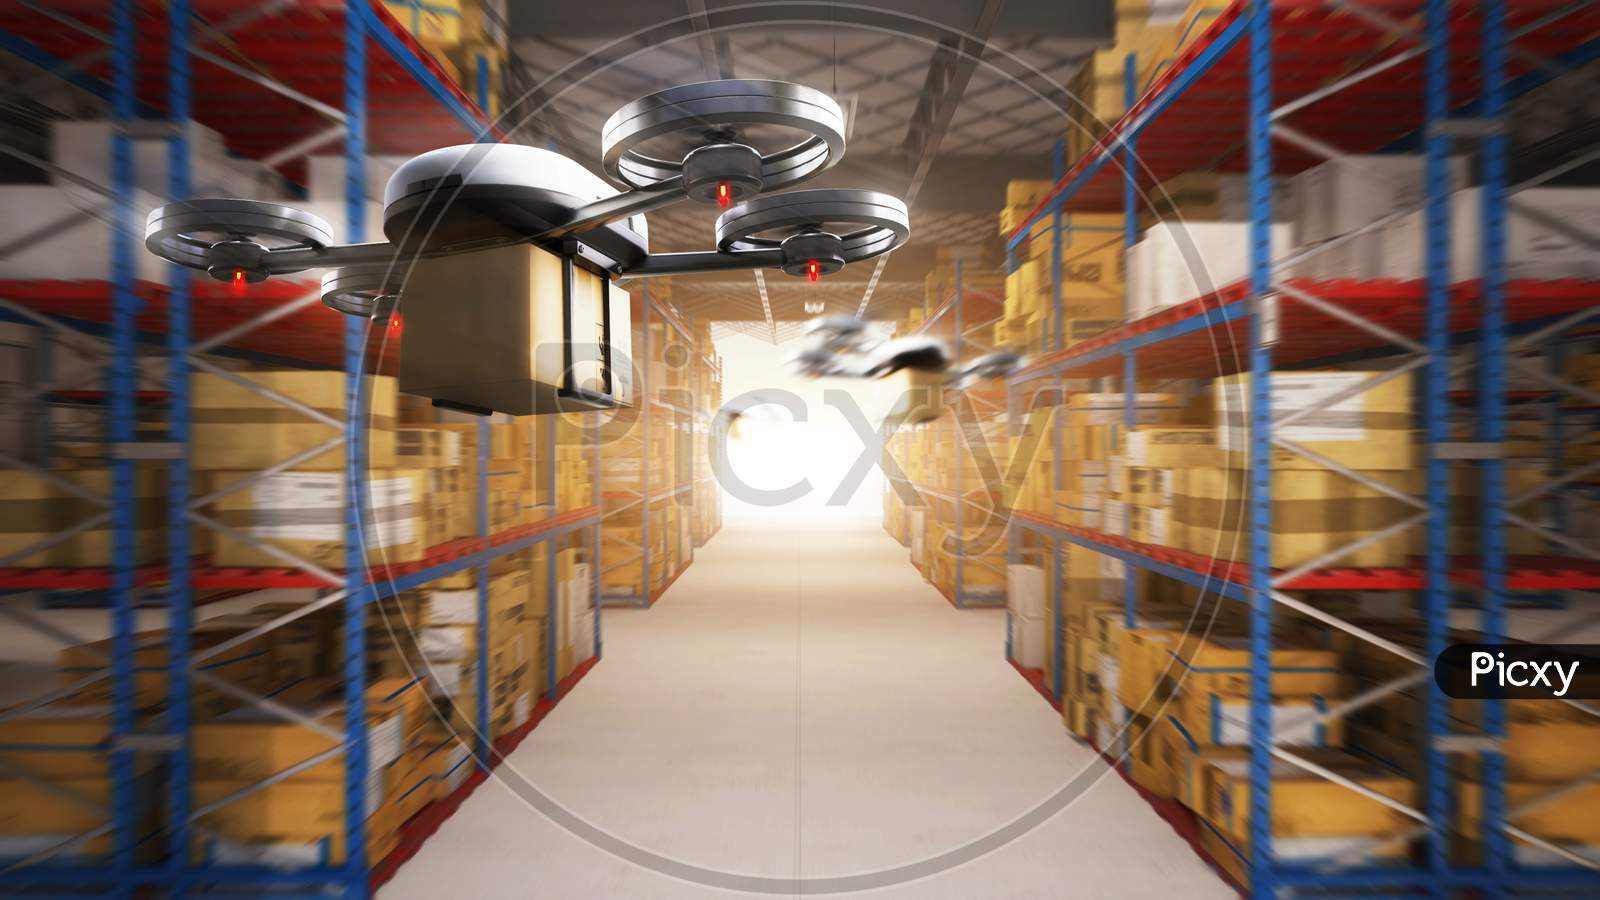 Delivery Drone Delivering The Packages To The Distribution Center And Customers From Warehouse Storage. Futuristics Industrial Technology Transportation Vehicle Concept. 3D Illustration Rendering